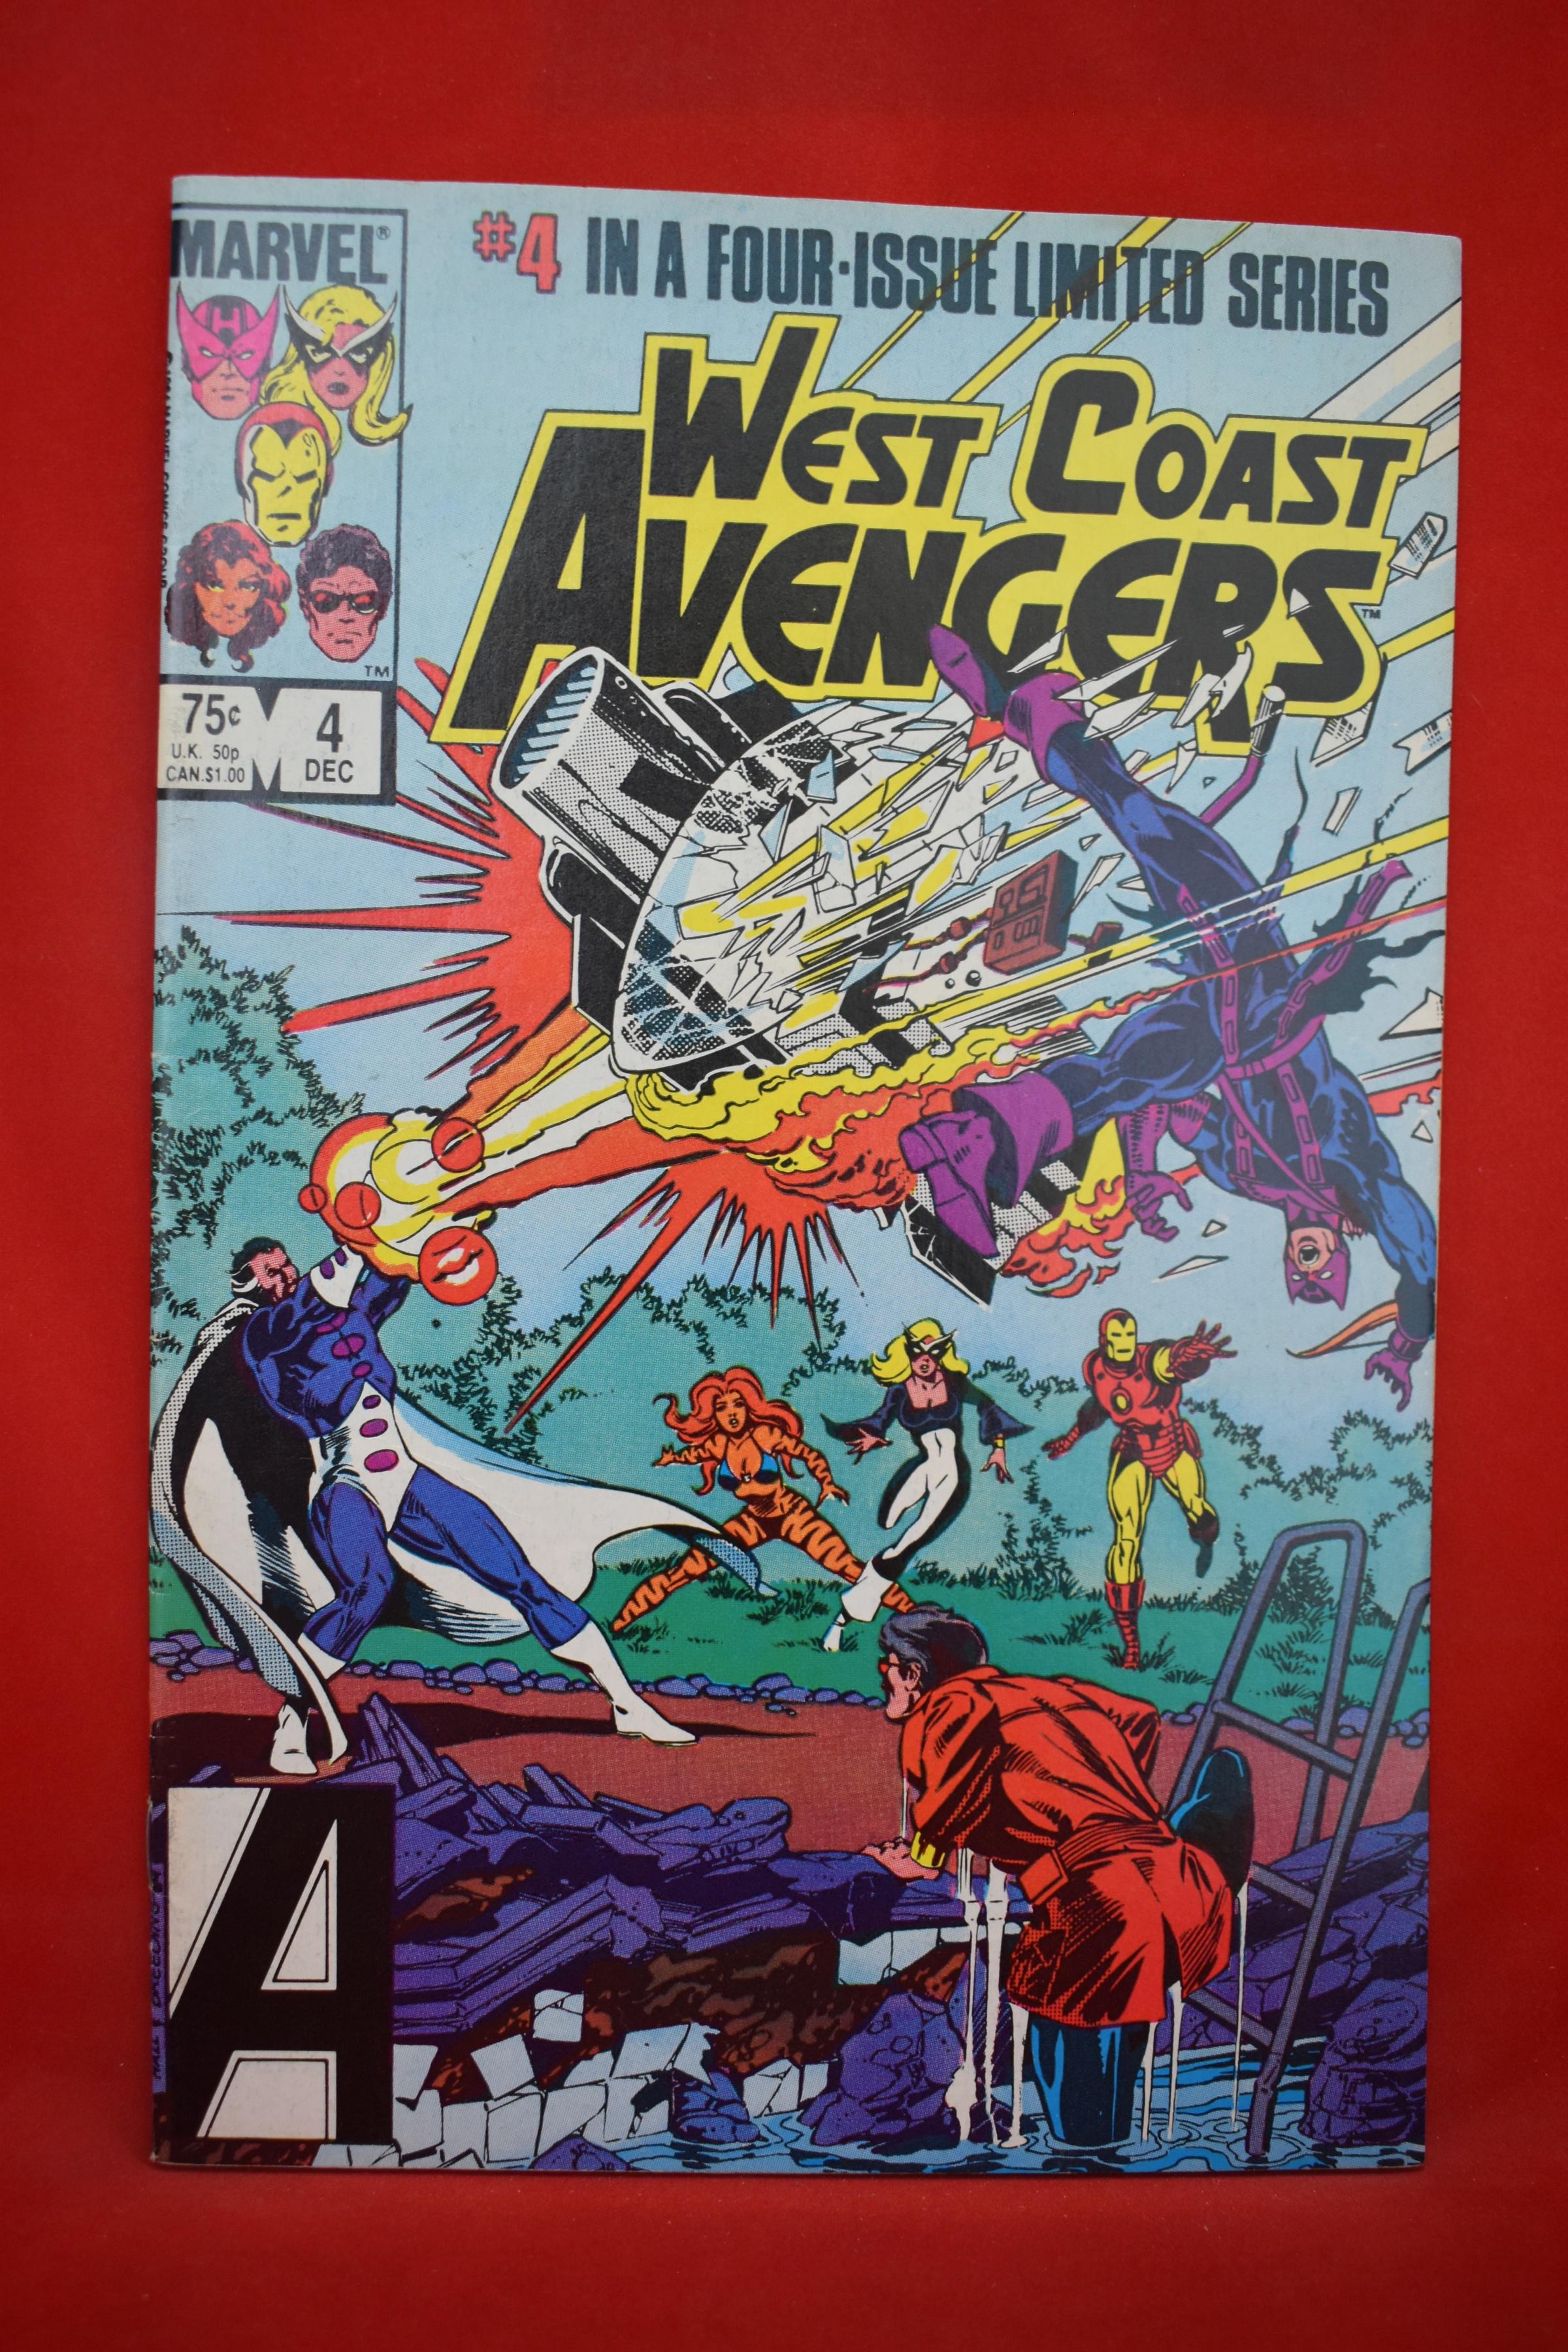 WEST COAST AVENGERS 1-4 | 1ST APP AND ORIGIN OF TEAM - LIMITED SERIES